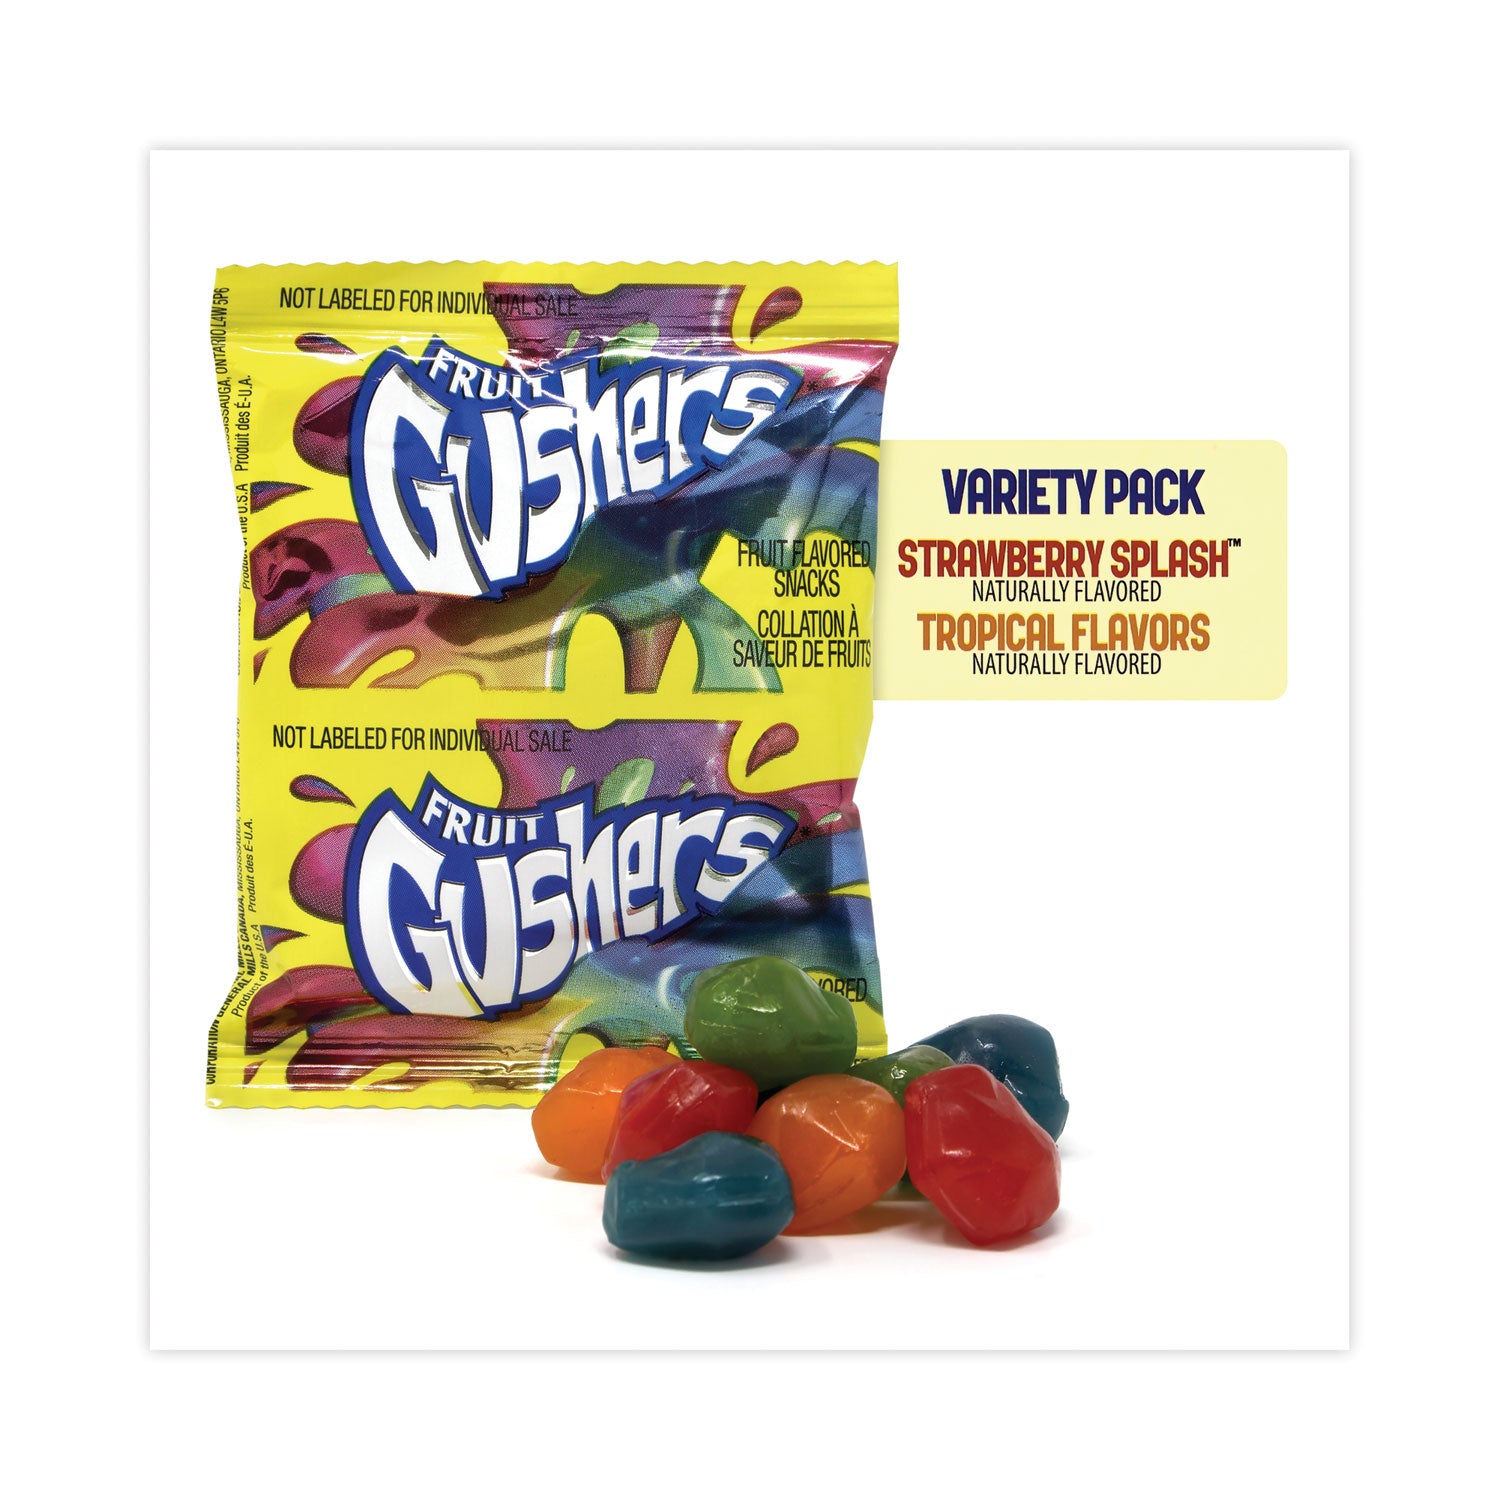 fruit-gushers-fruit-snacks-strawberry-and-tropical-fruit-flavors-08-oz-42-pouches-carton-ships-in-1-3-business-days_grr22001036 - 2